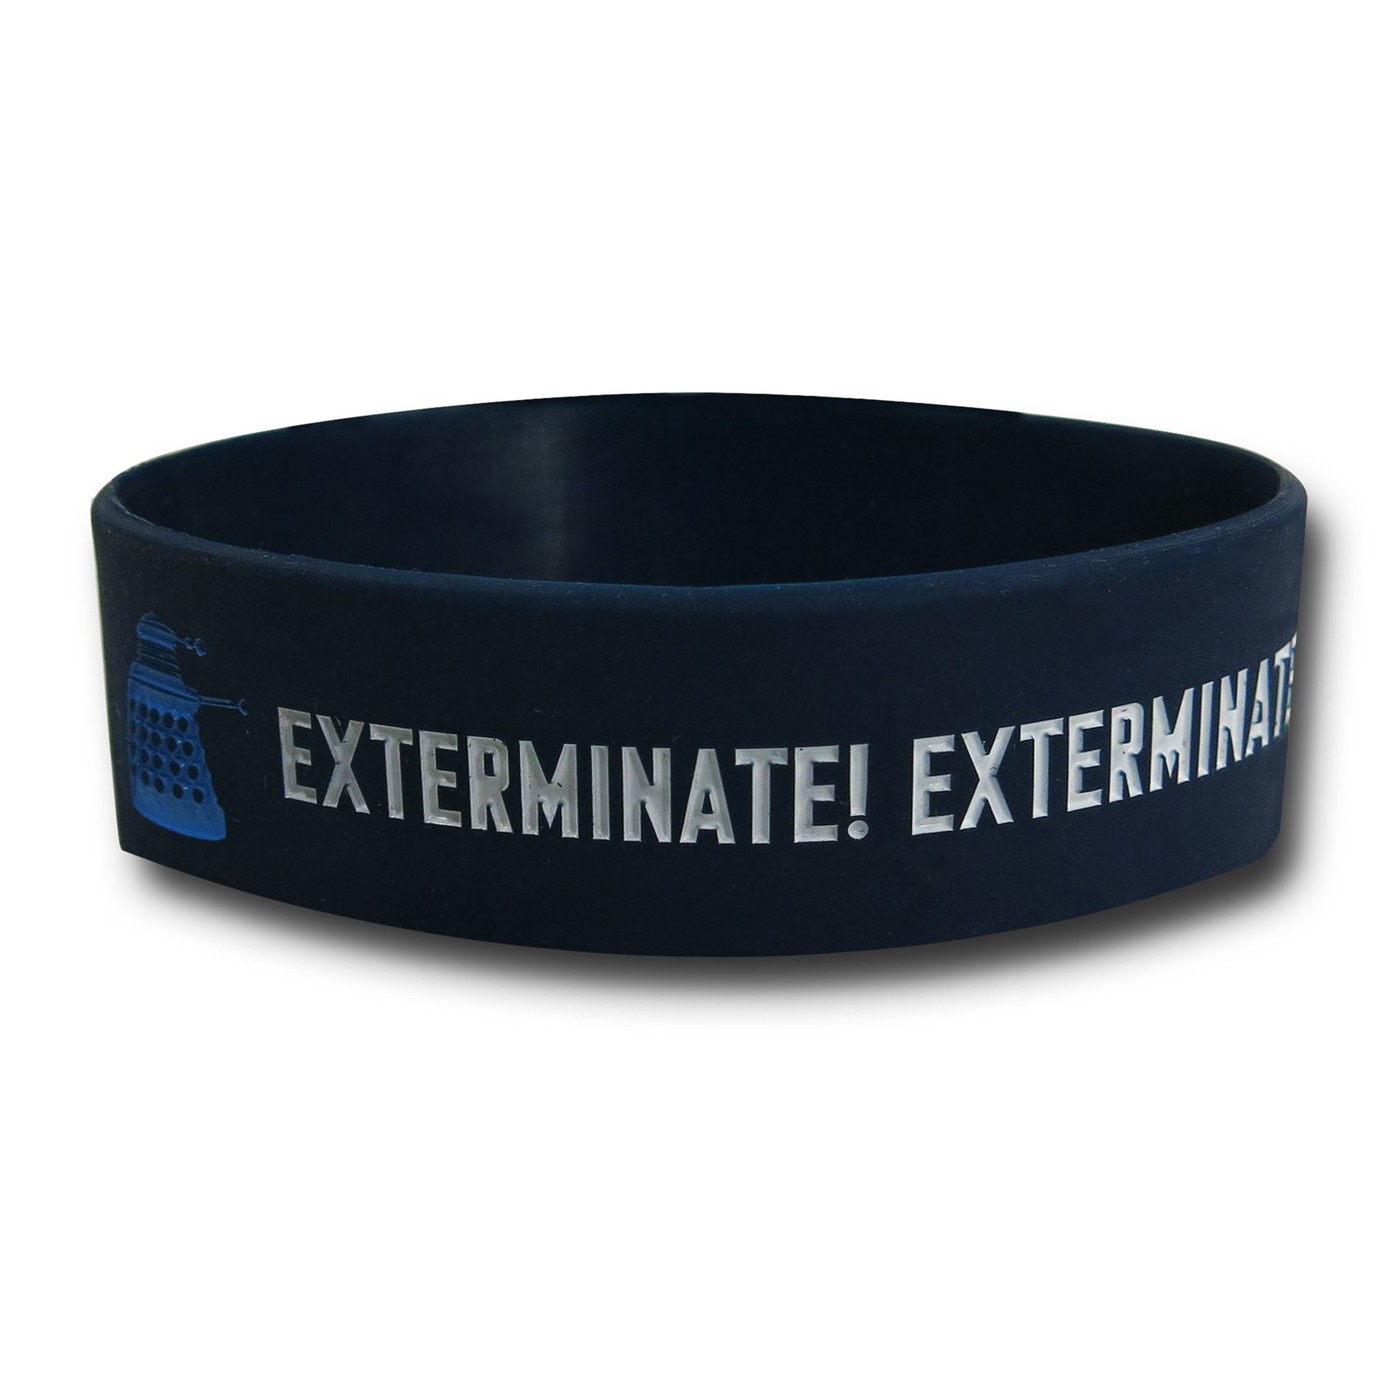 Doctor Who Dalek Exterminate Rubber Wristband